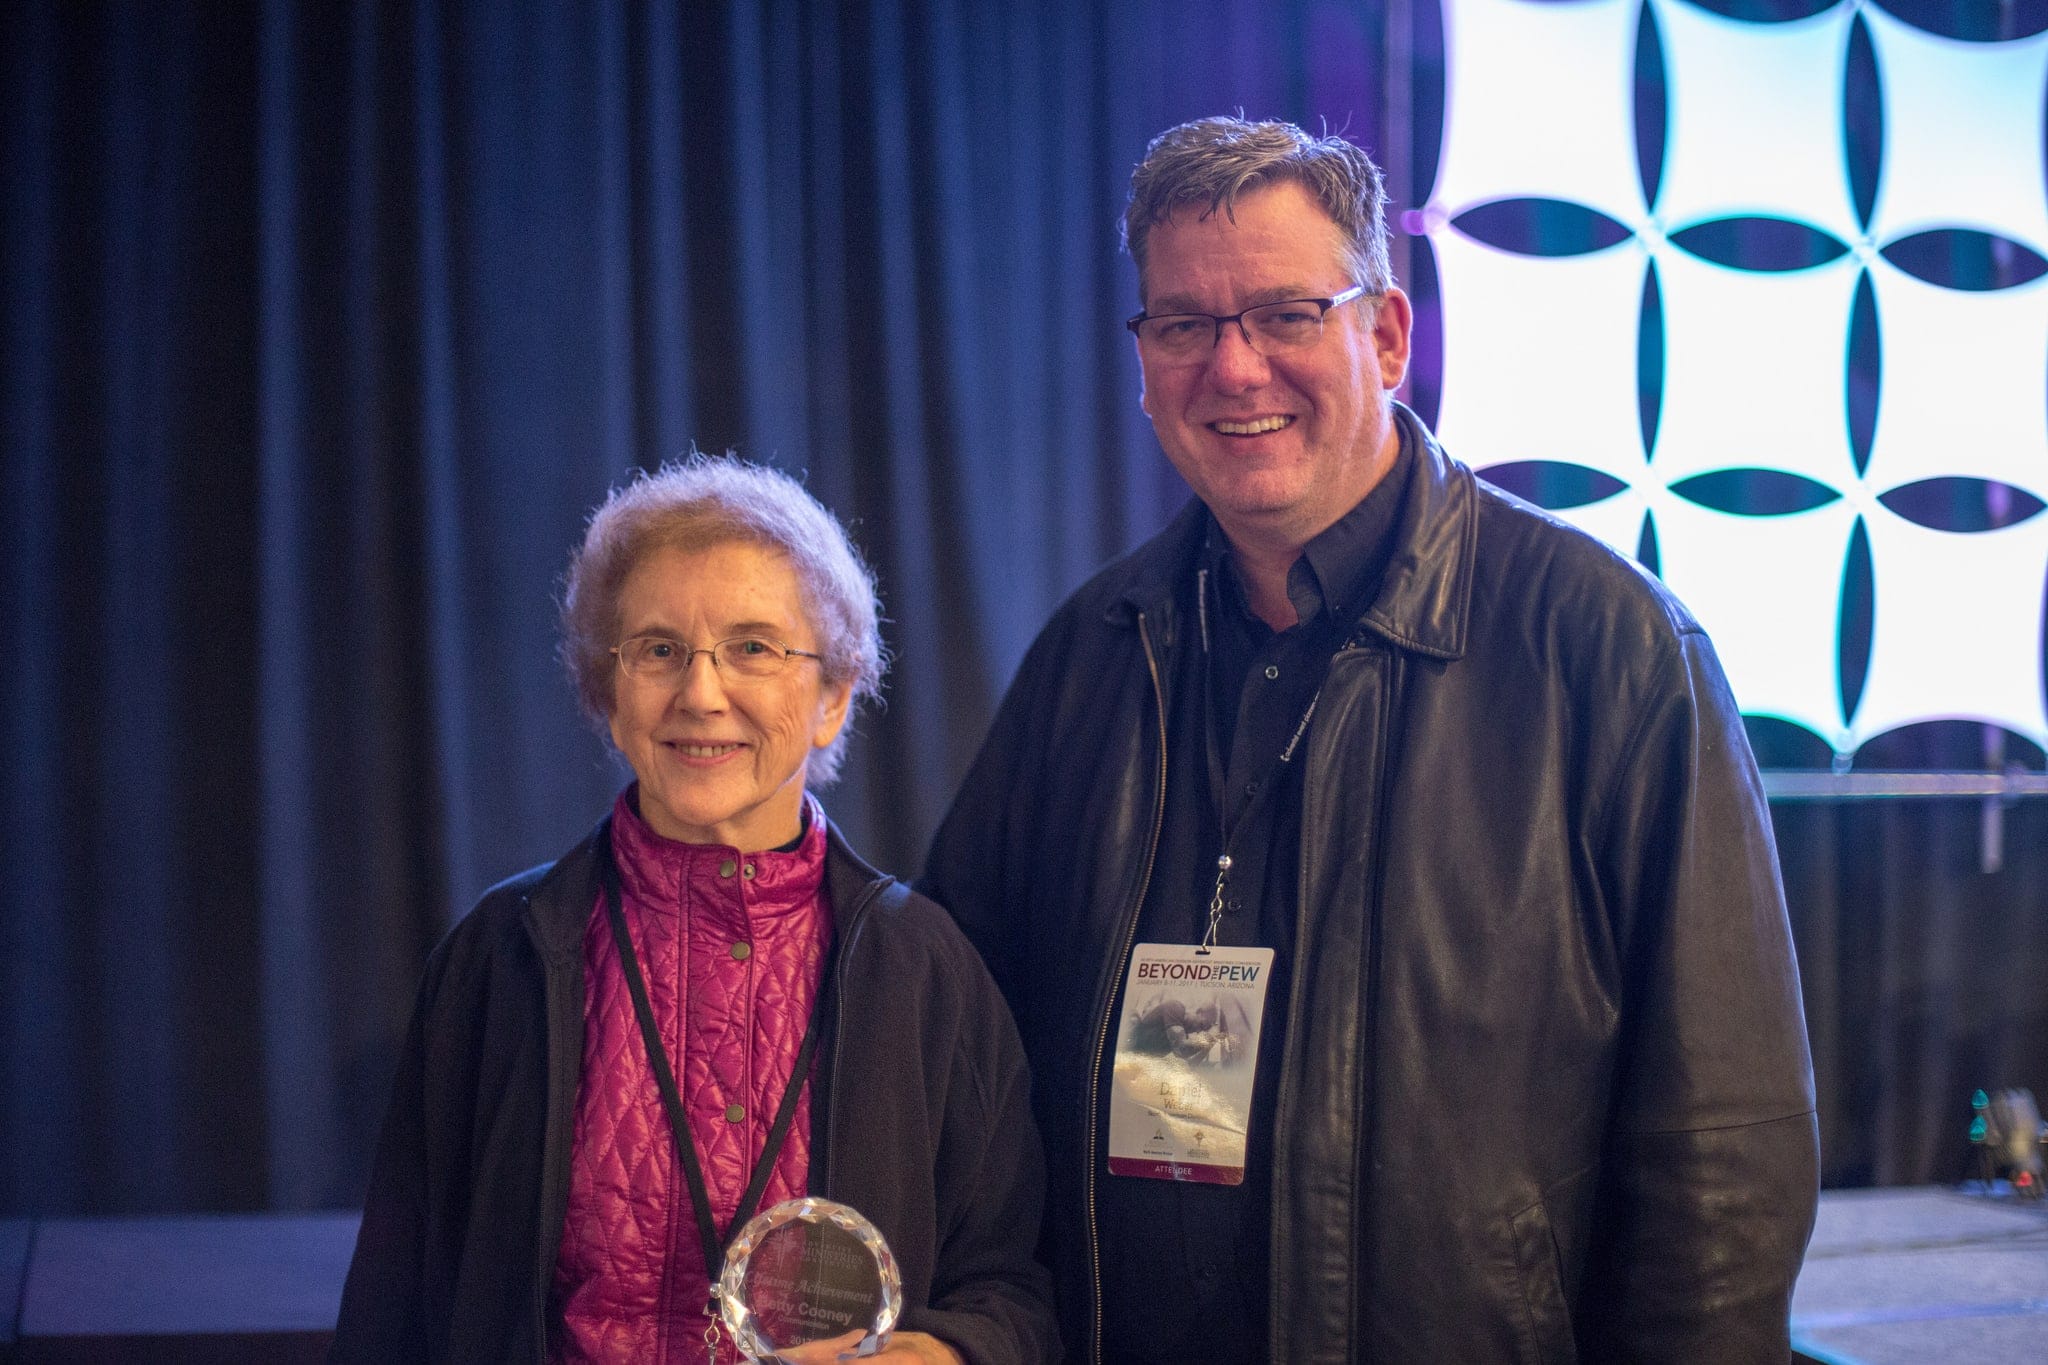 Dan Weber presents Betty Cooney with the 2017 AMC Lifetime Achievement Award in Communication at the ministries convention held in Tucson, Arizona.